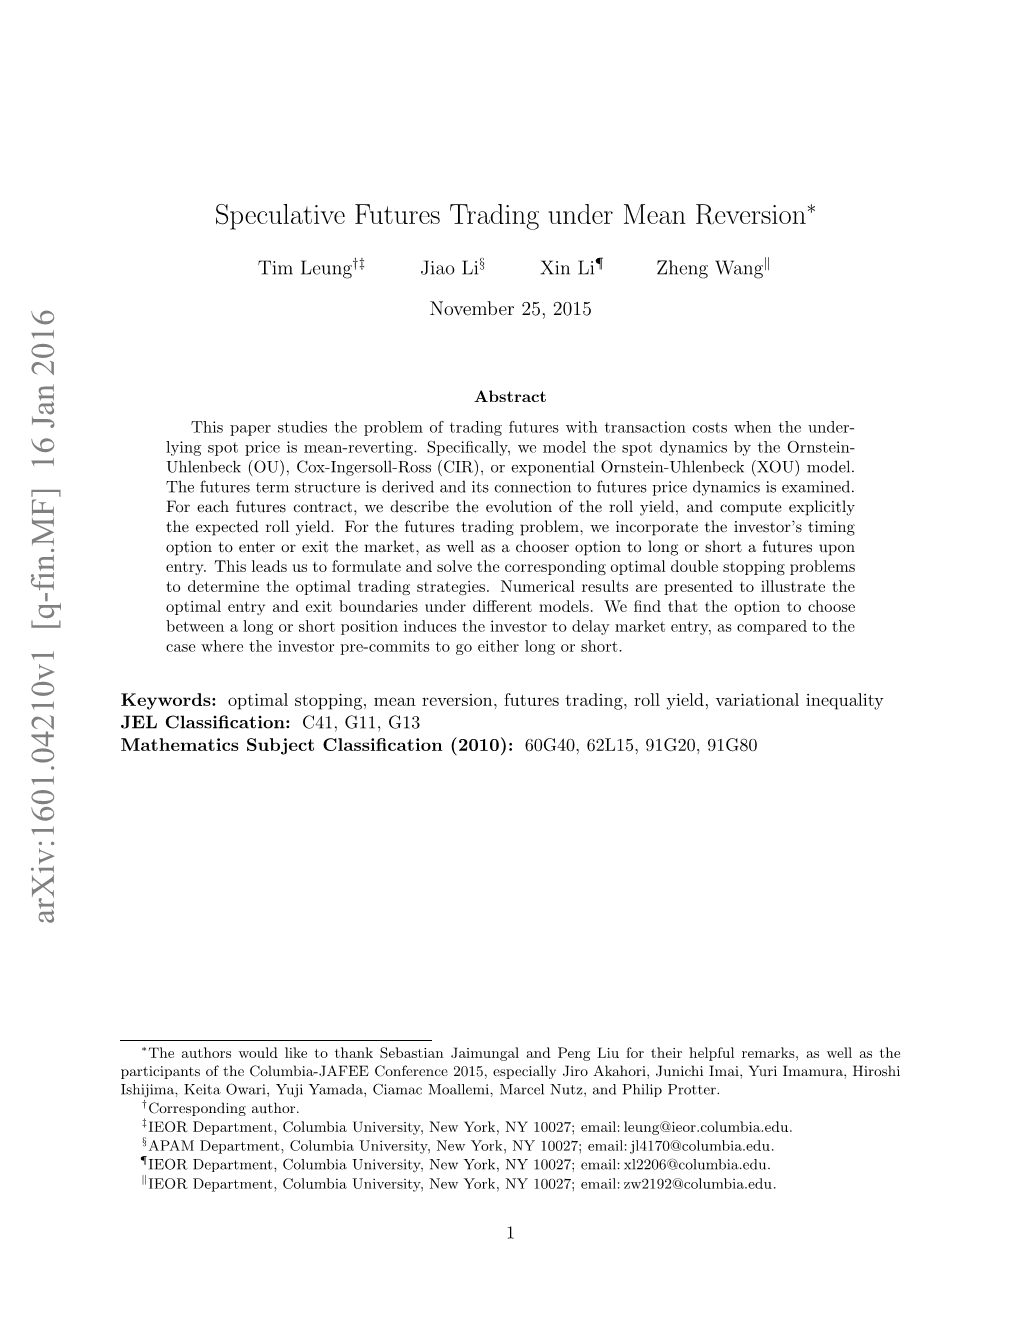 Speculative Futures Trading Under Mean Reversion